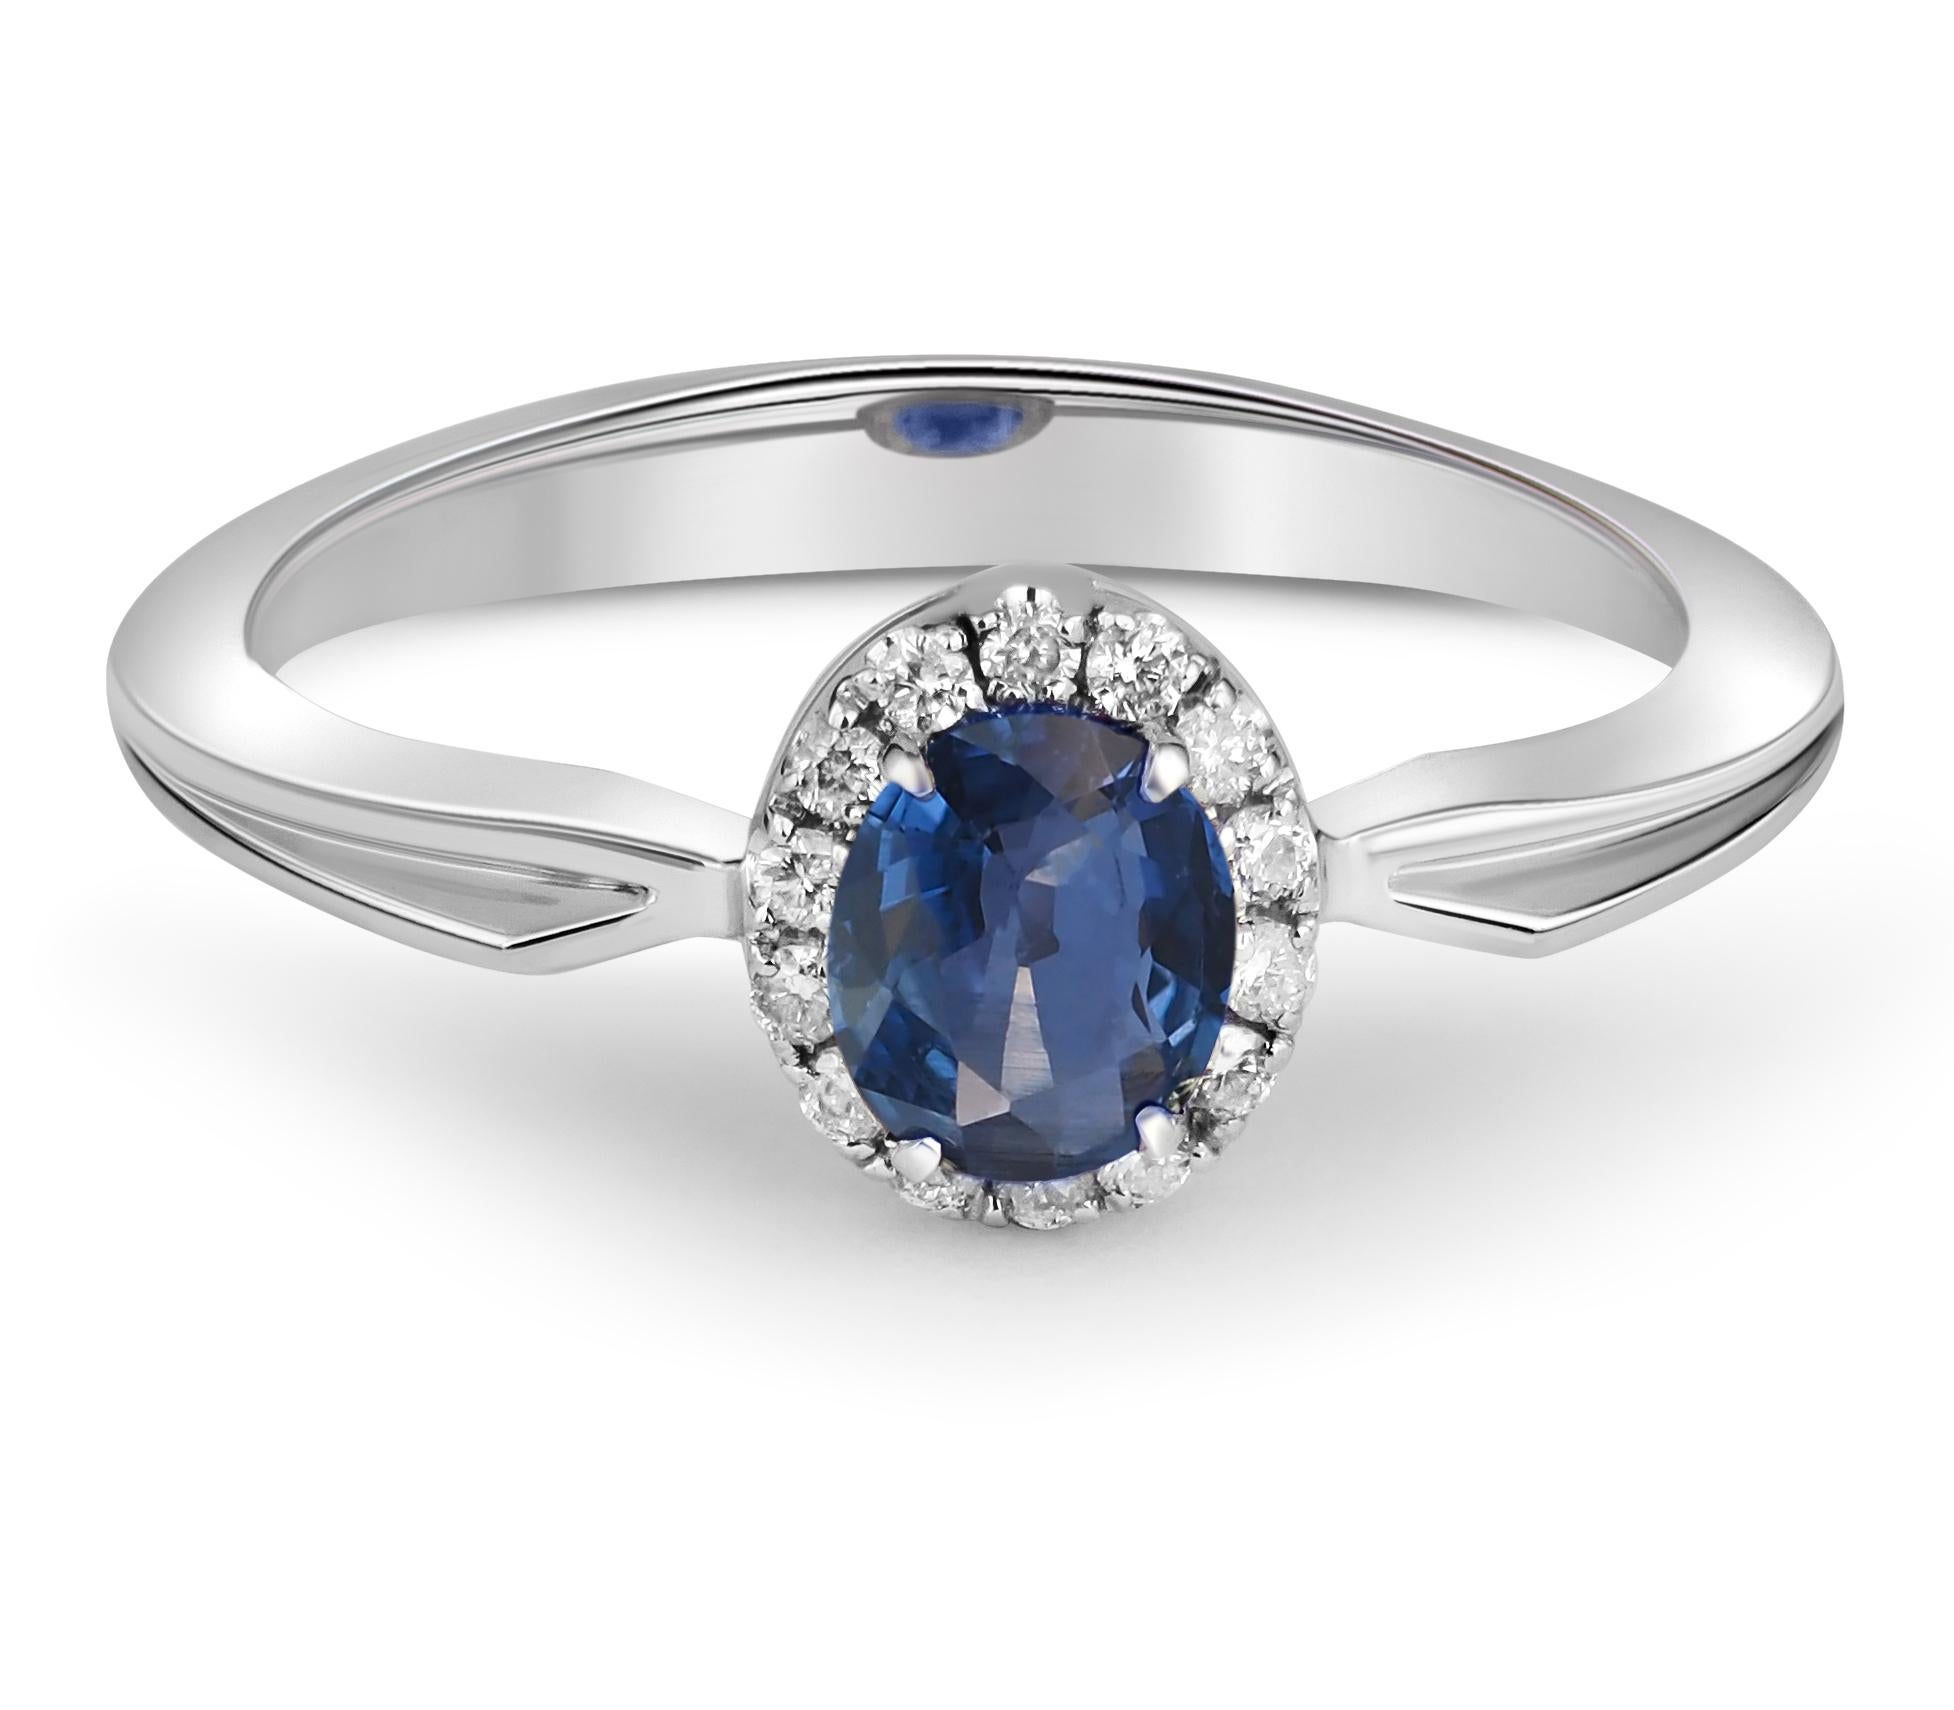 Sapphire and diamonds 14k gold ring. 
Sapphire engagement ring. Oval sapphire ring. Blue sapphire gold ring. Sapphire vintage ring.

Metal type: Gold
Metal stamp: 14k Gold
Weight: 2 gr. depends from size.

Central gemstone:
Sapphire: oval shape,